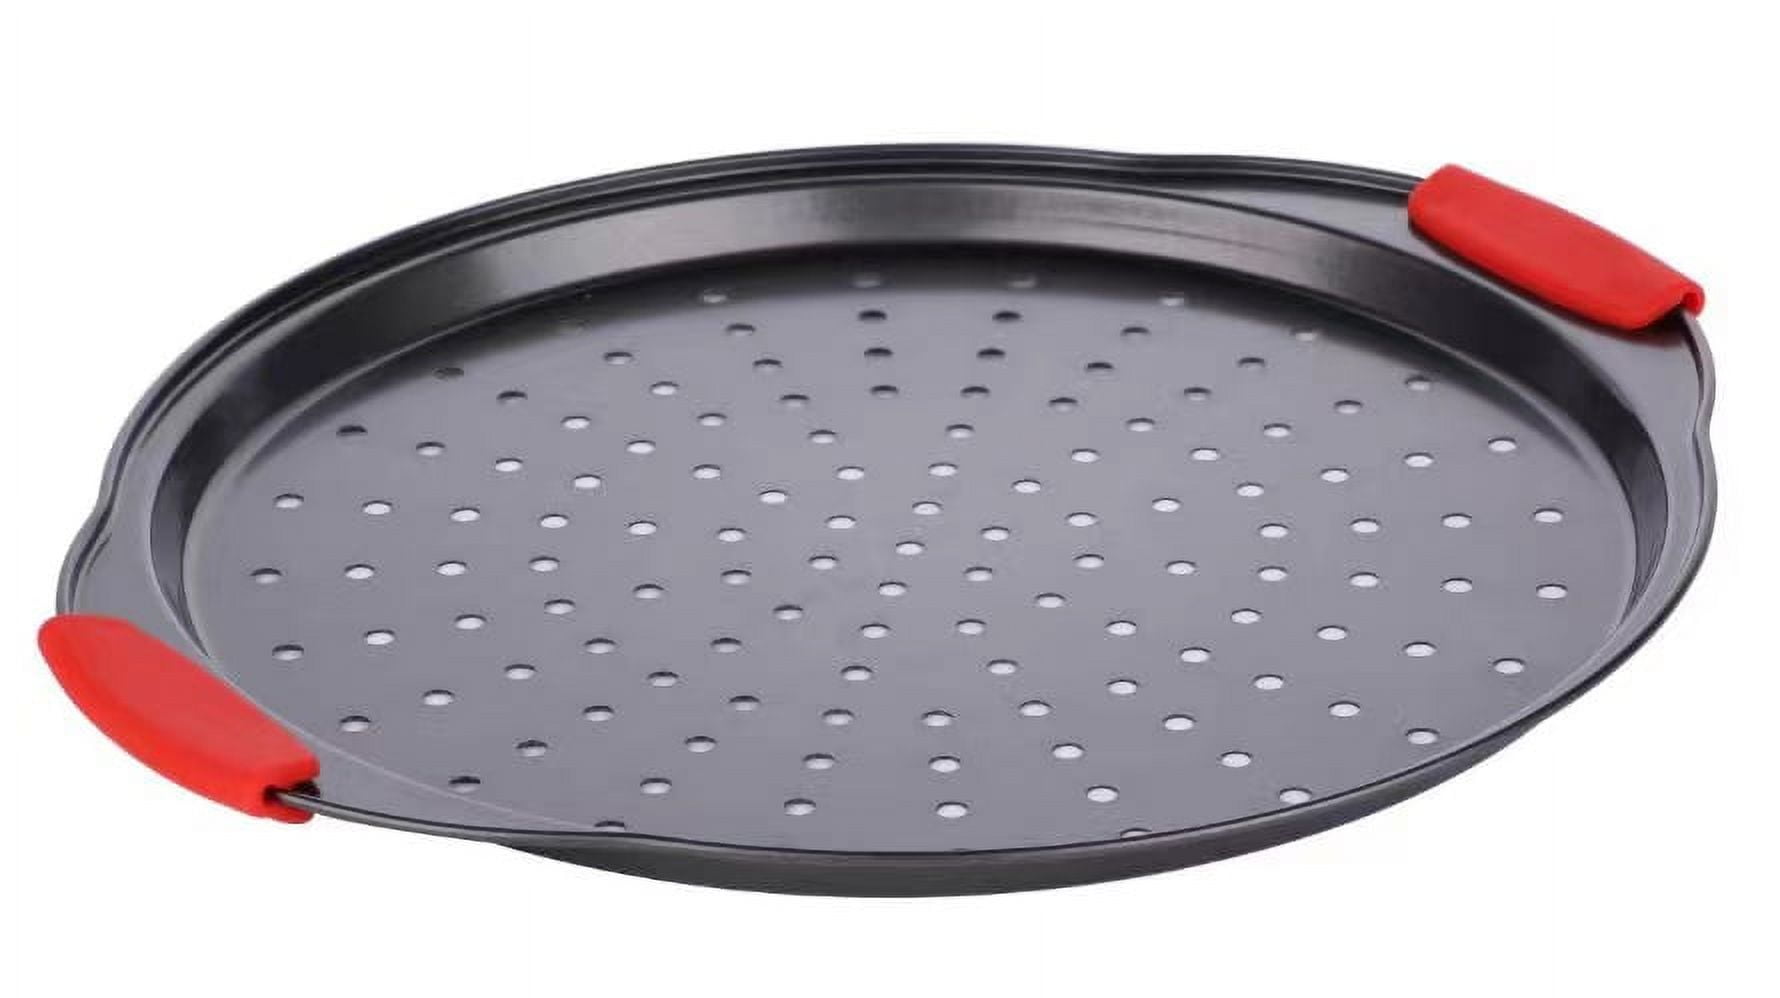 ODDIER 13inch Nonstick Pizza Pan，Carbon Steel Baking Oven Pizza